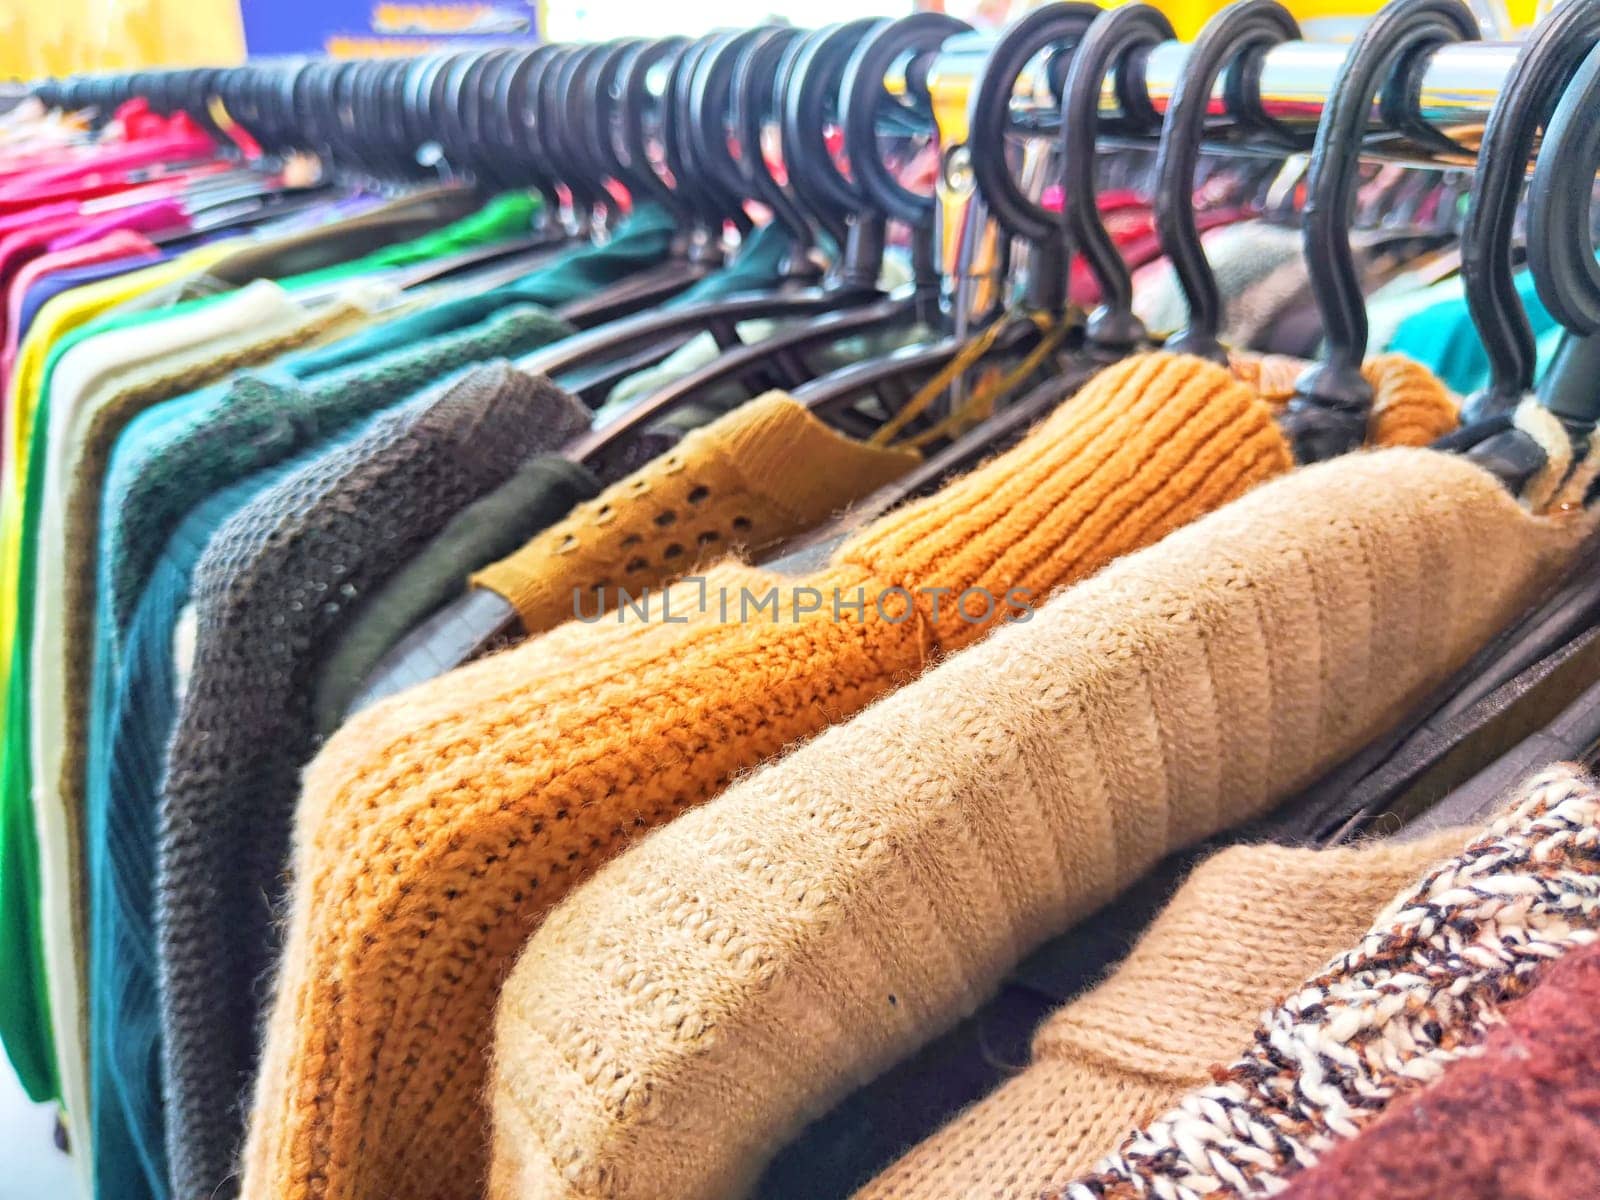 Colorful Assortment of Knitted Sweaters on Display in Bright Clothing Store. Variety of colorful sweaters hanging on a rack in a shop